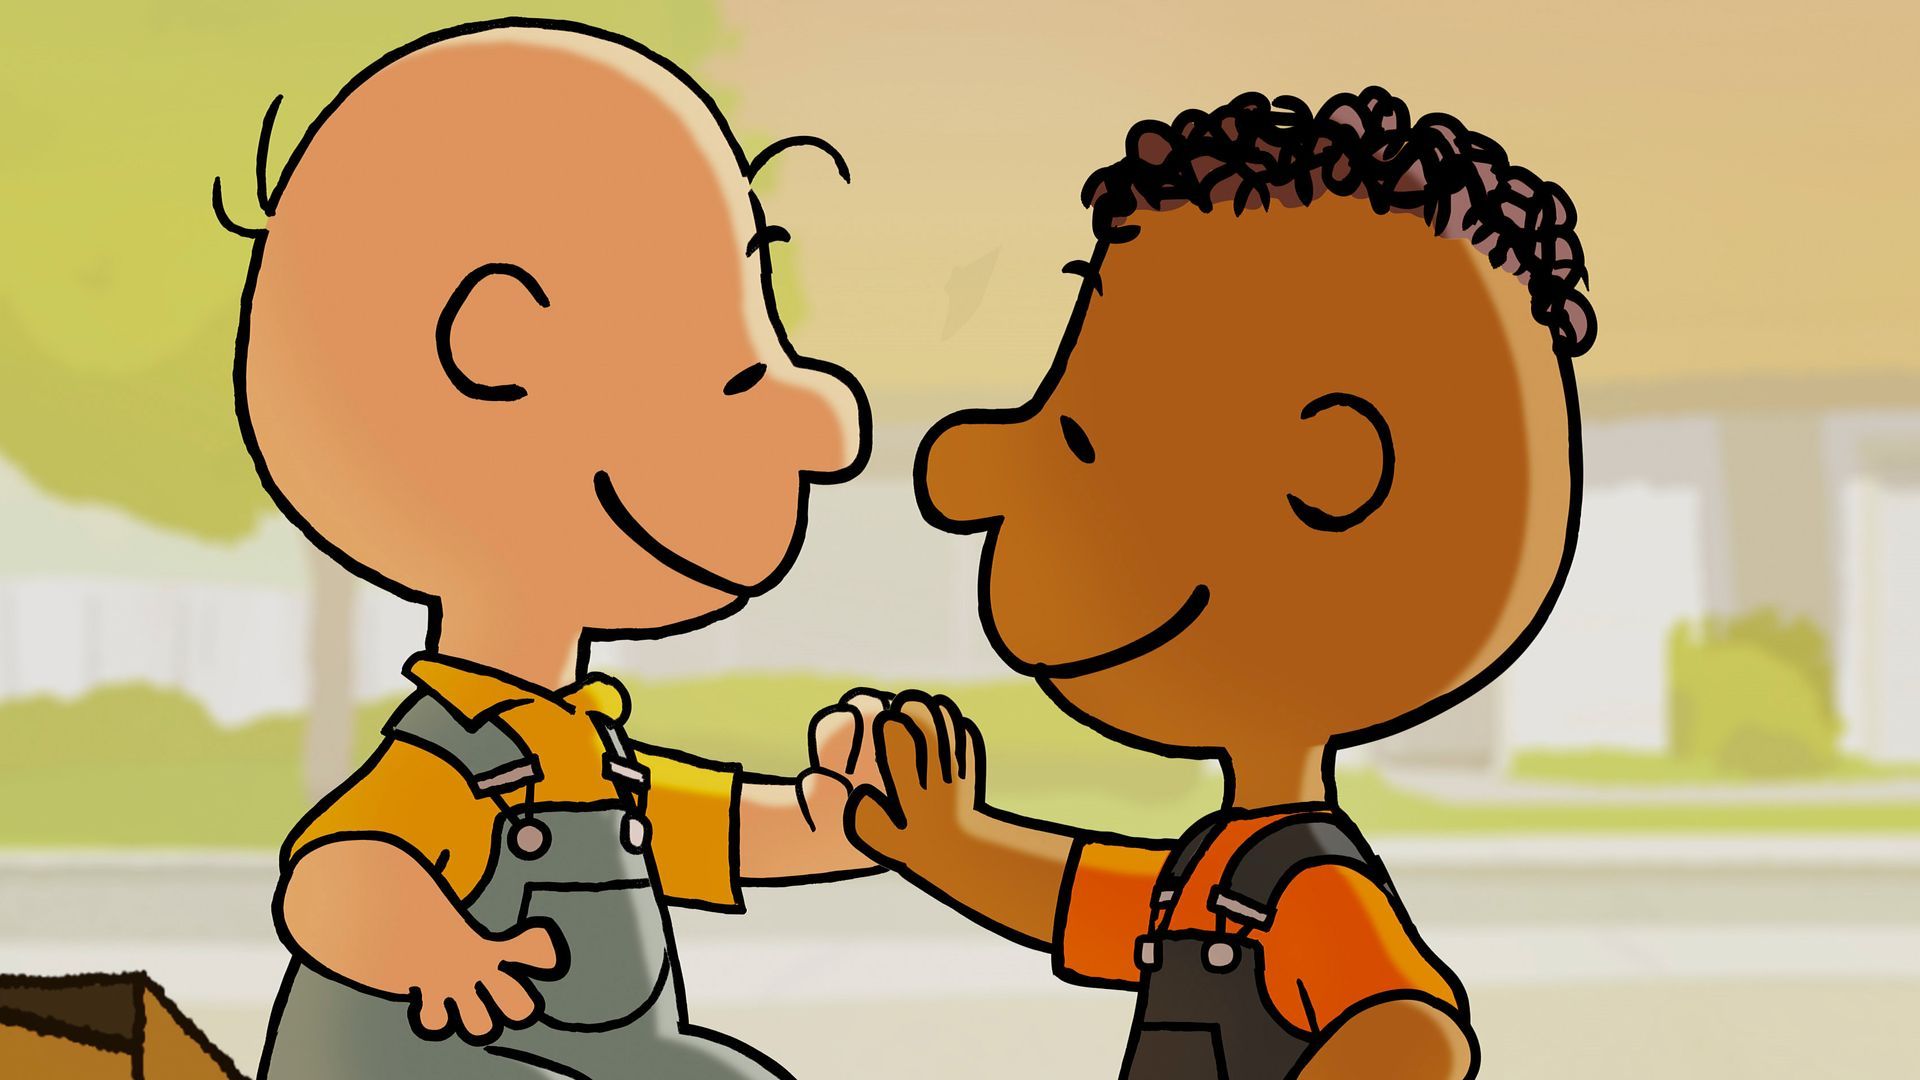 Charlie Brown and Franklin Armstrong